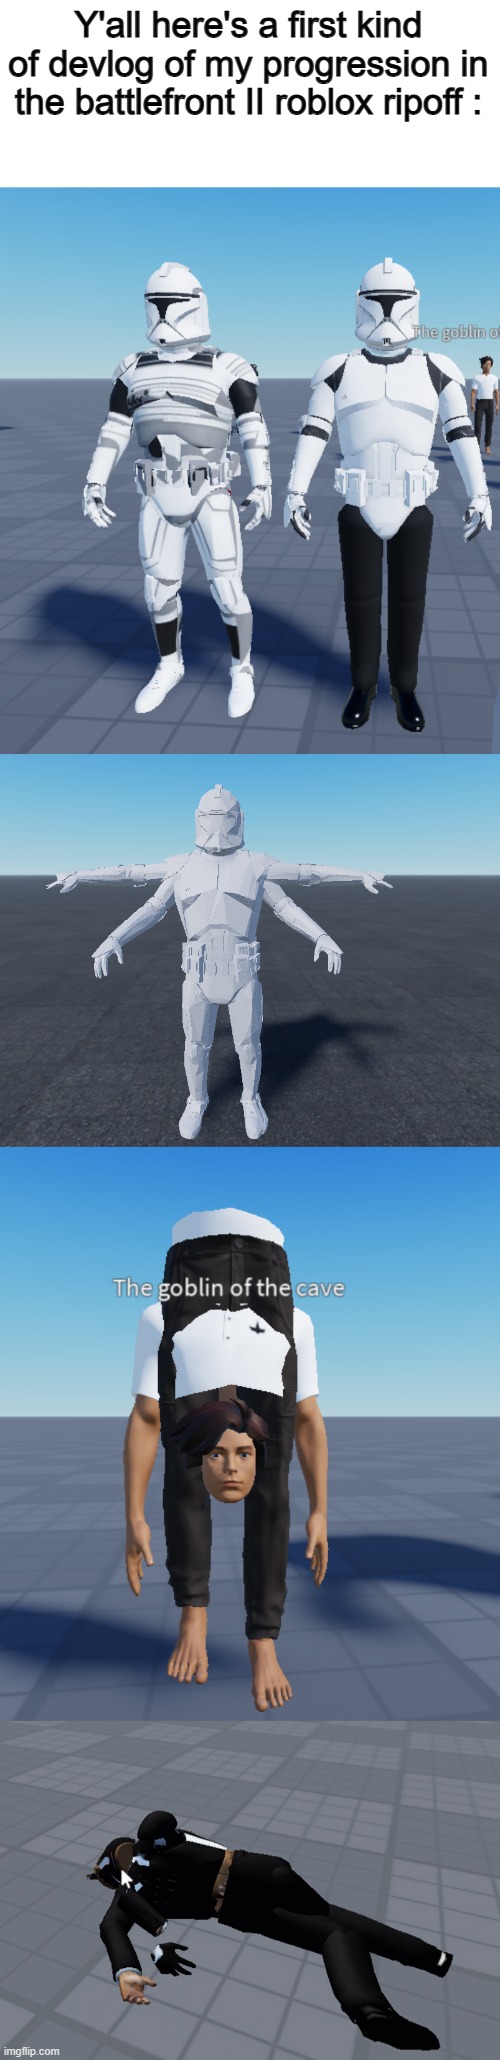 Devlog #1 Im kinda goofing around ngl | Y'all here's a first kind of devlog of my progression in the battlefront II roblox ripoff : | made w/ Imgflip meme maker